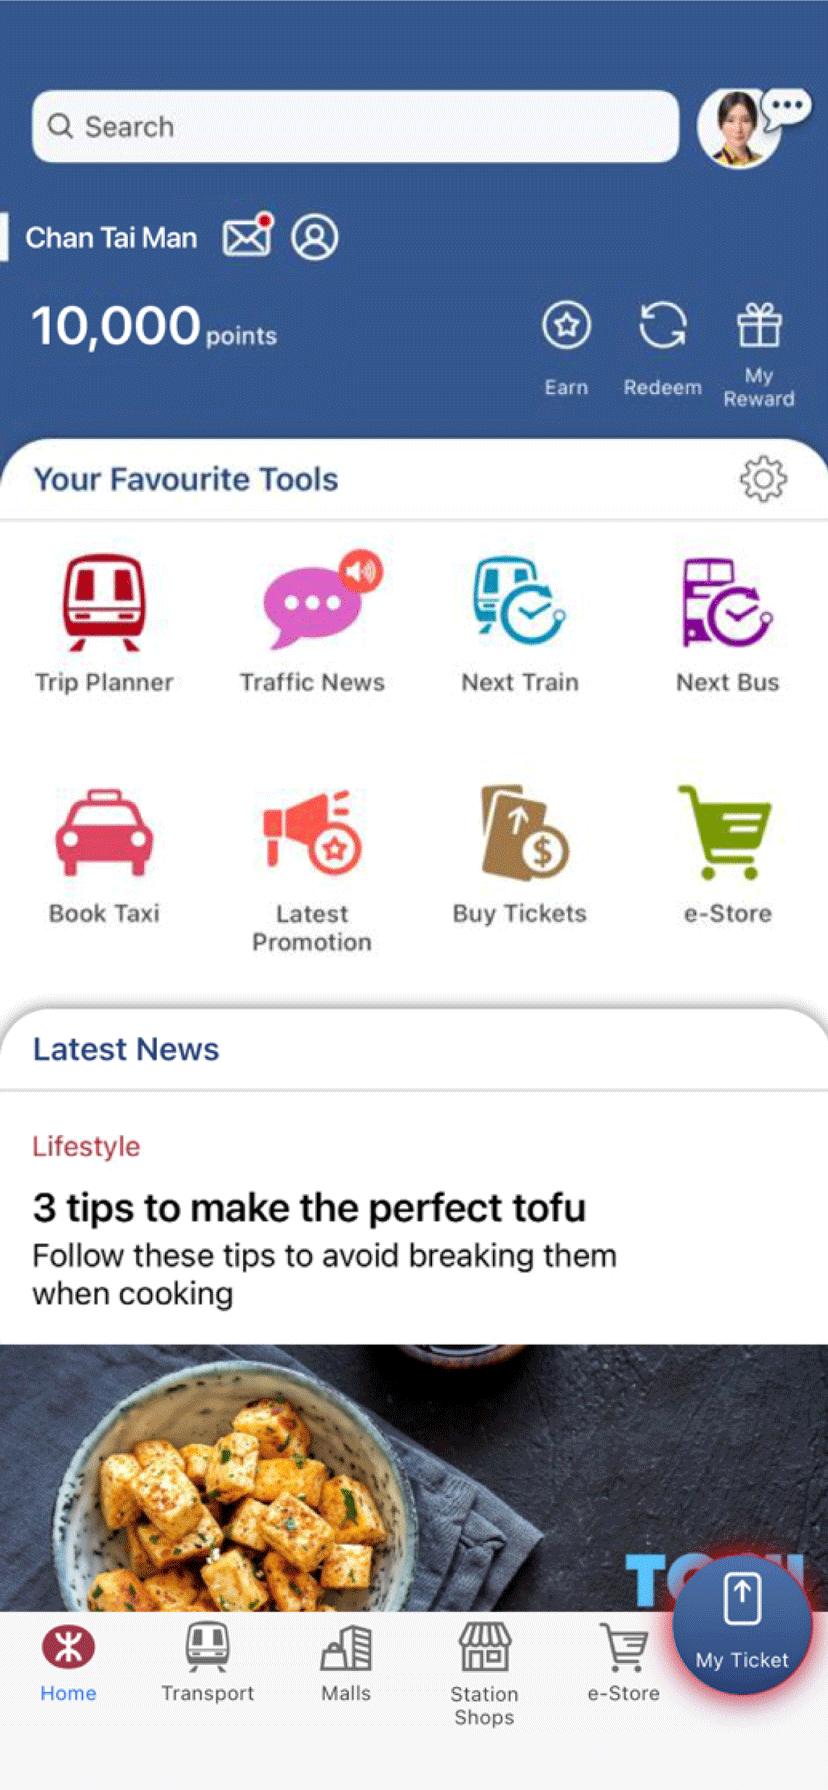 Log in to MTR Mobile and click 'My Tickets' on the homepage. Then tap 'Ticket Transactions Records' at the top right corner